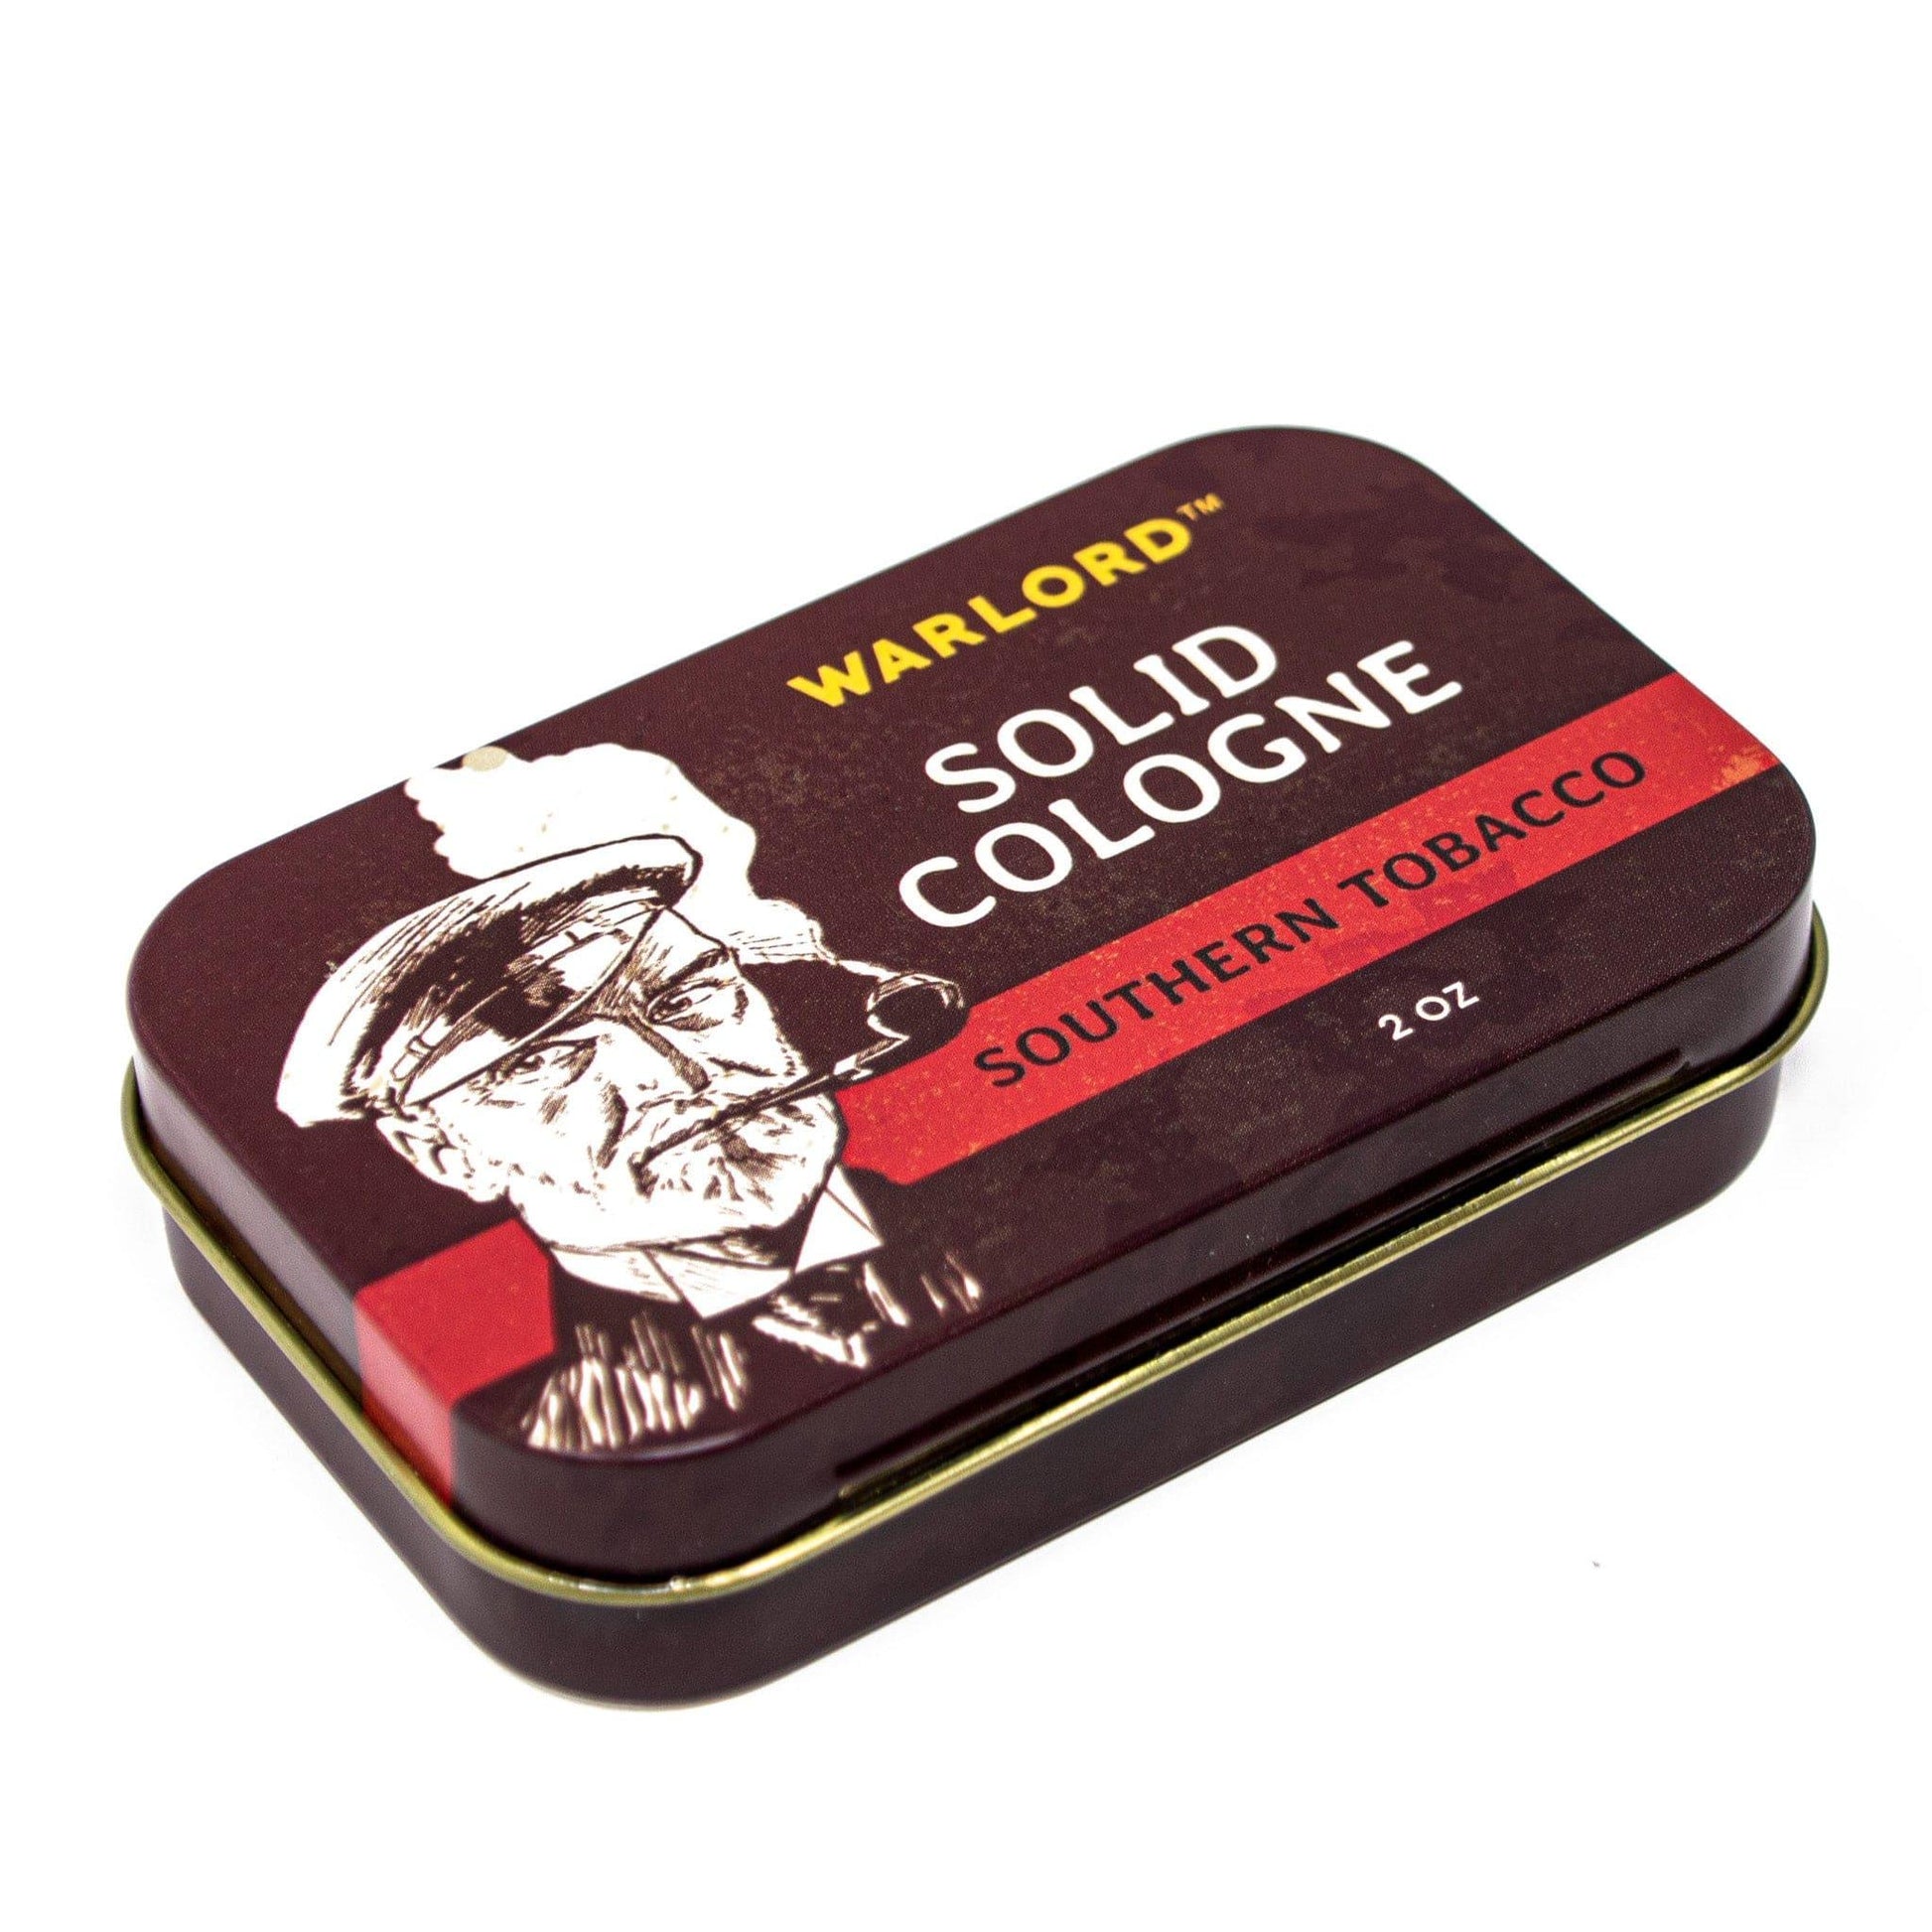 Solid Cologne - Warlord - Men's Grooming Essentials